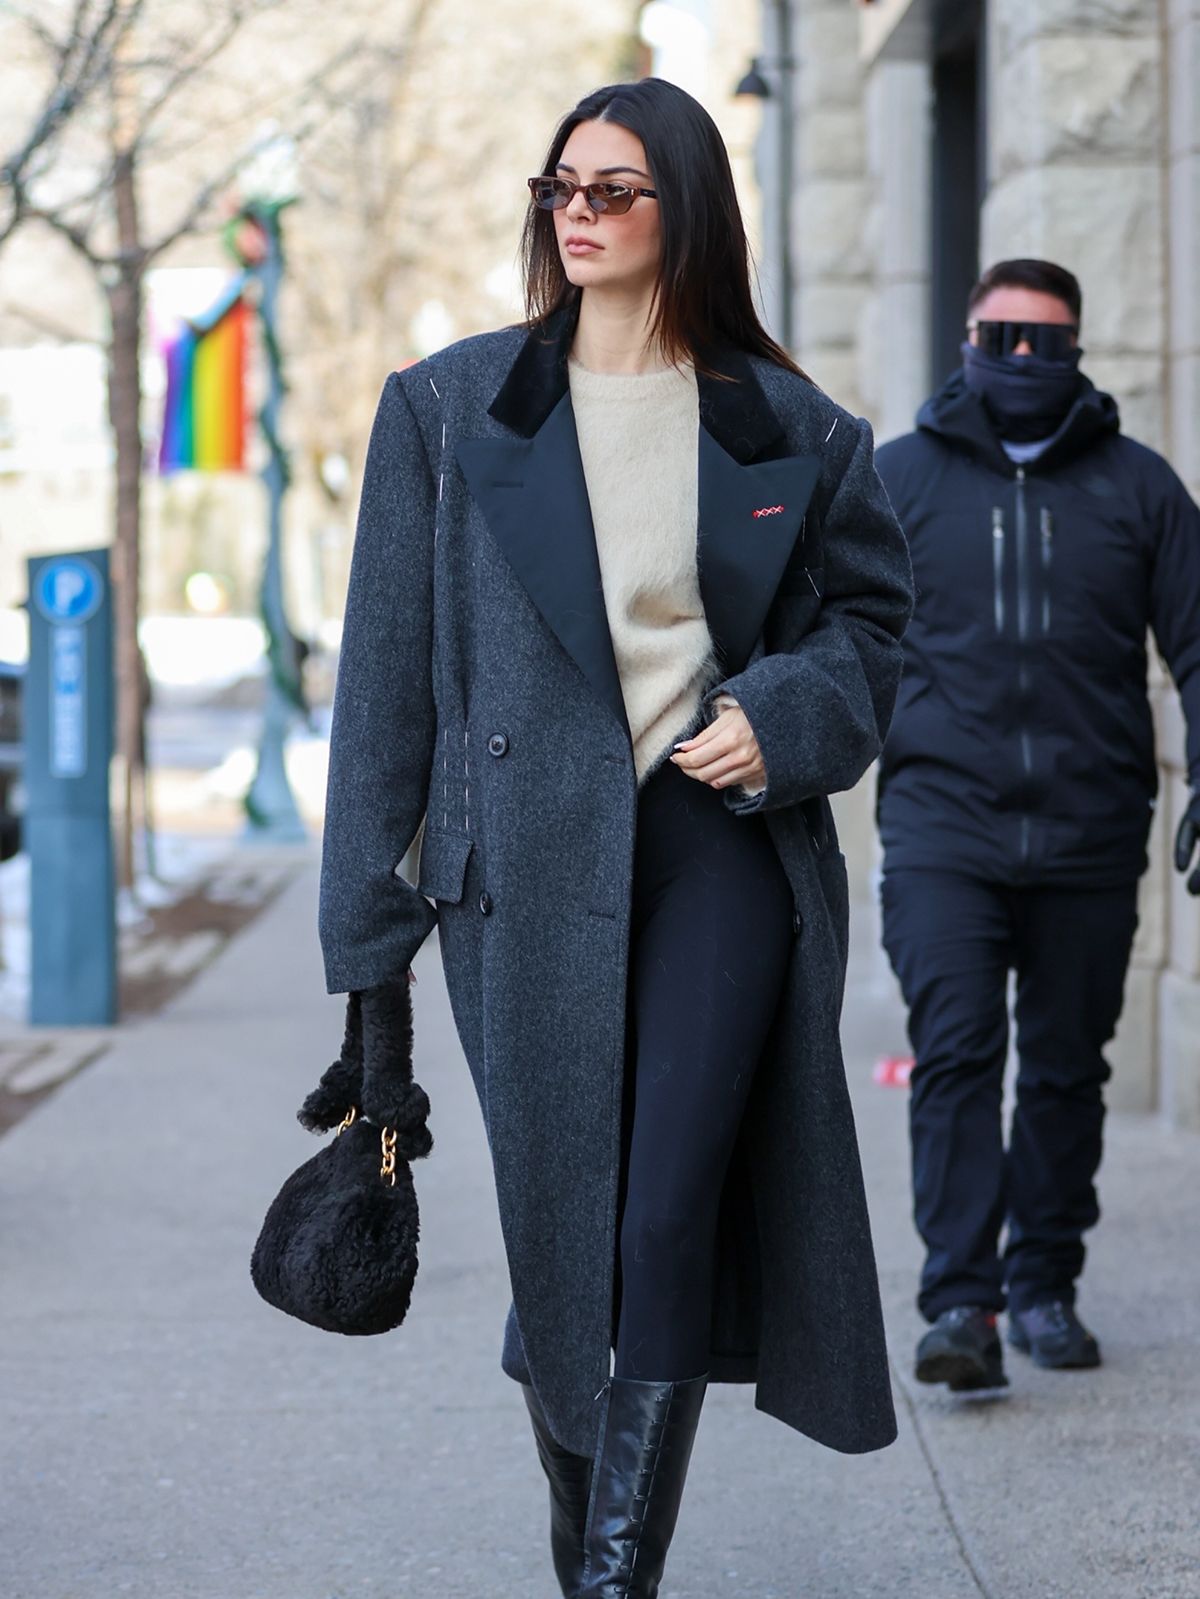 The One Trendy Boot Style That Kendall Jenner for Her Winter Break